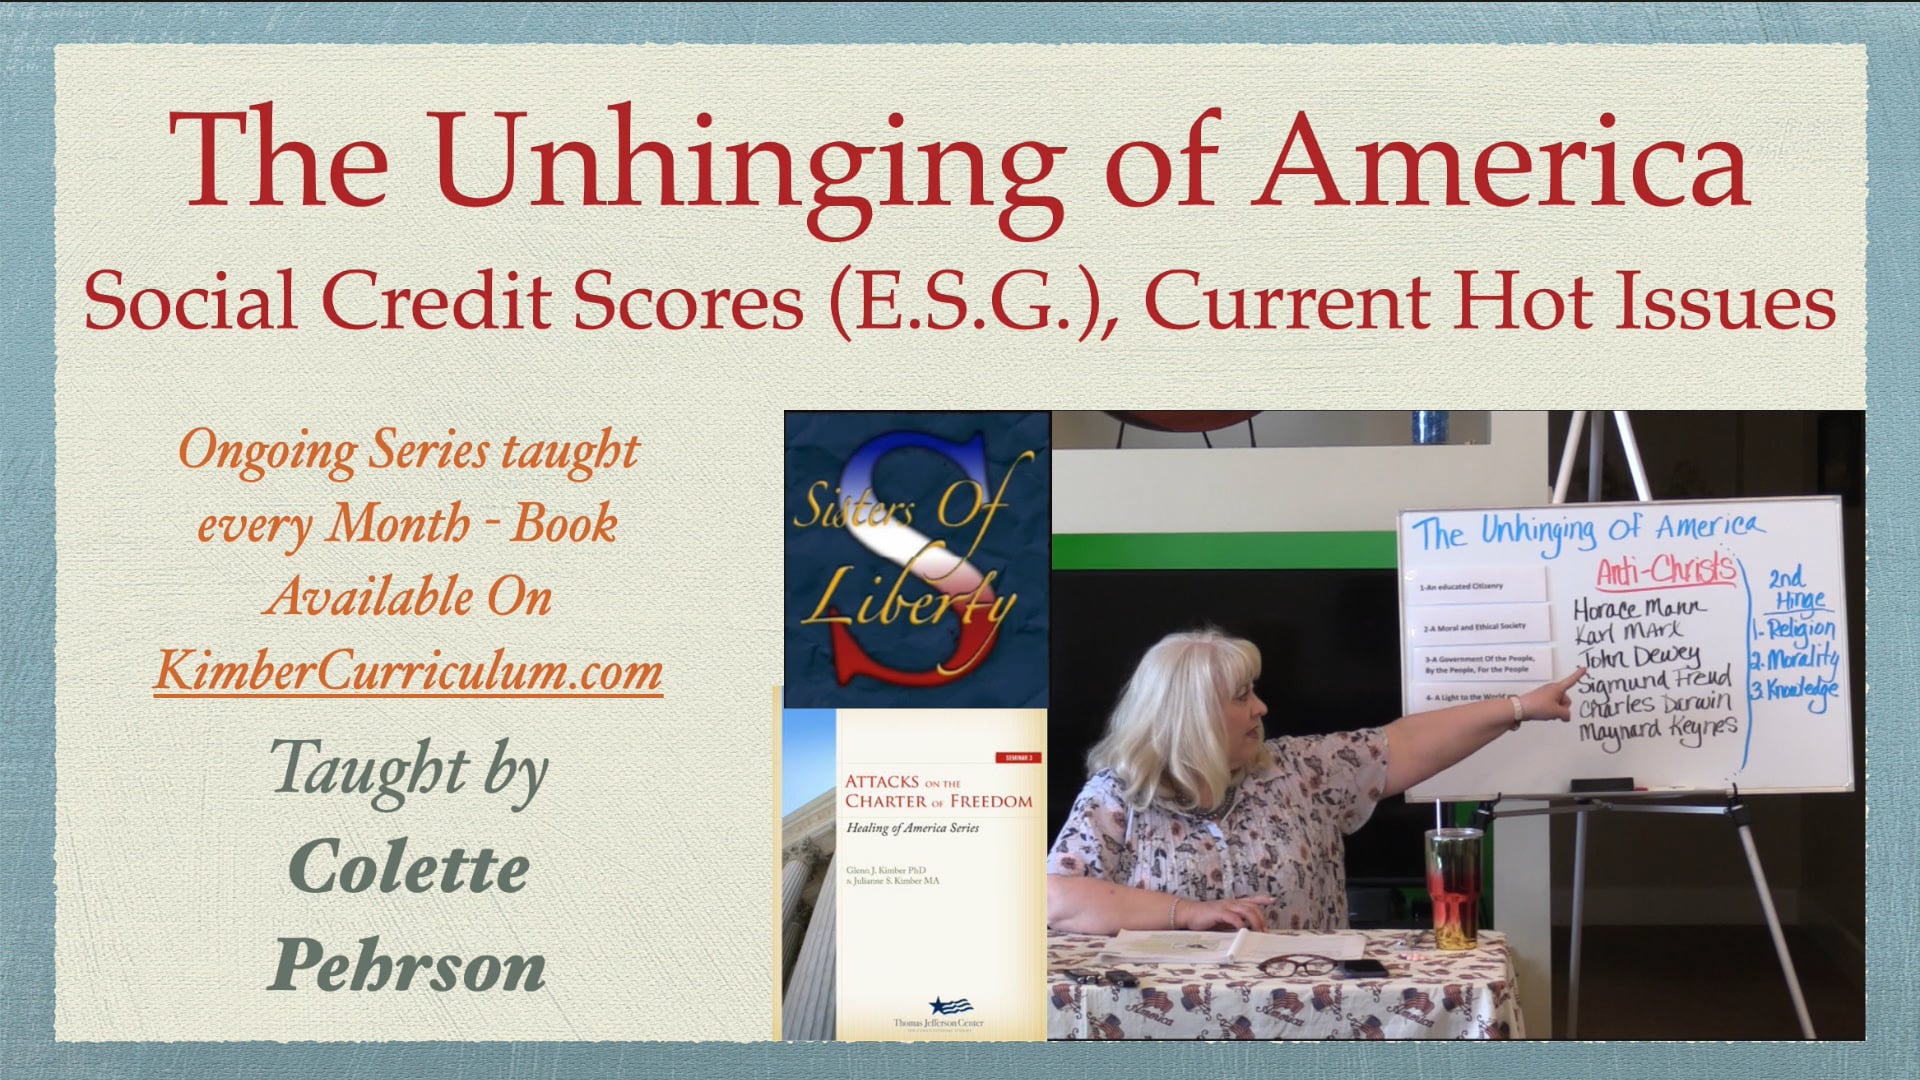 Colette Pehrson - The Unhinging of America & Current Hot Issues